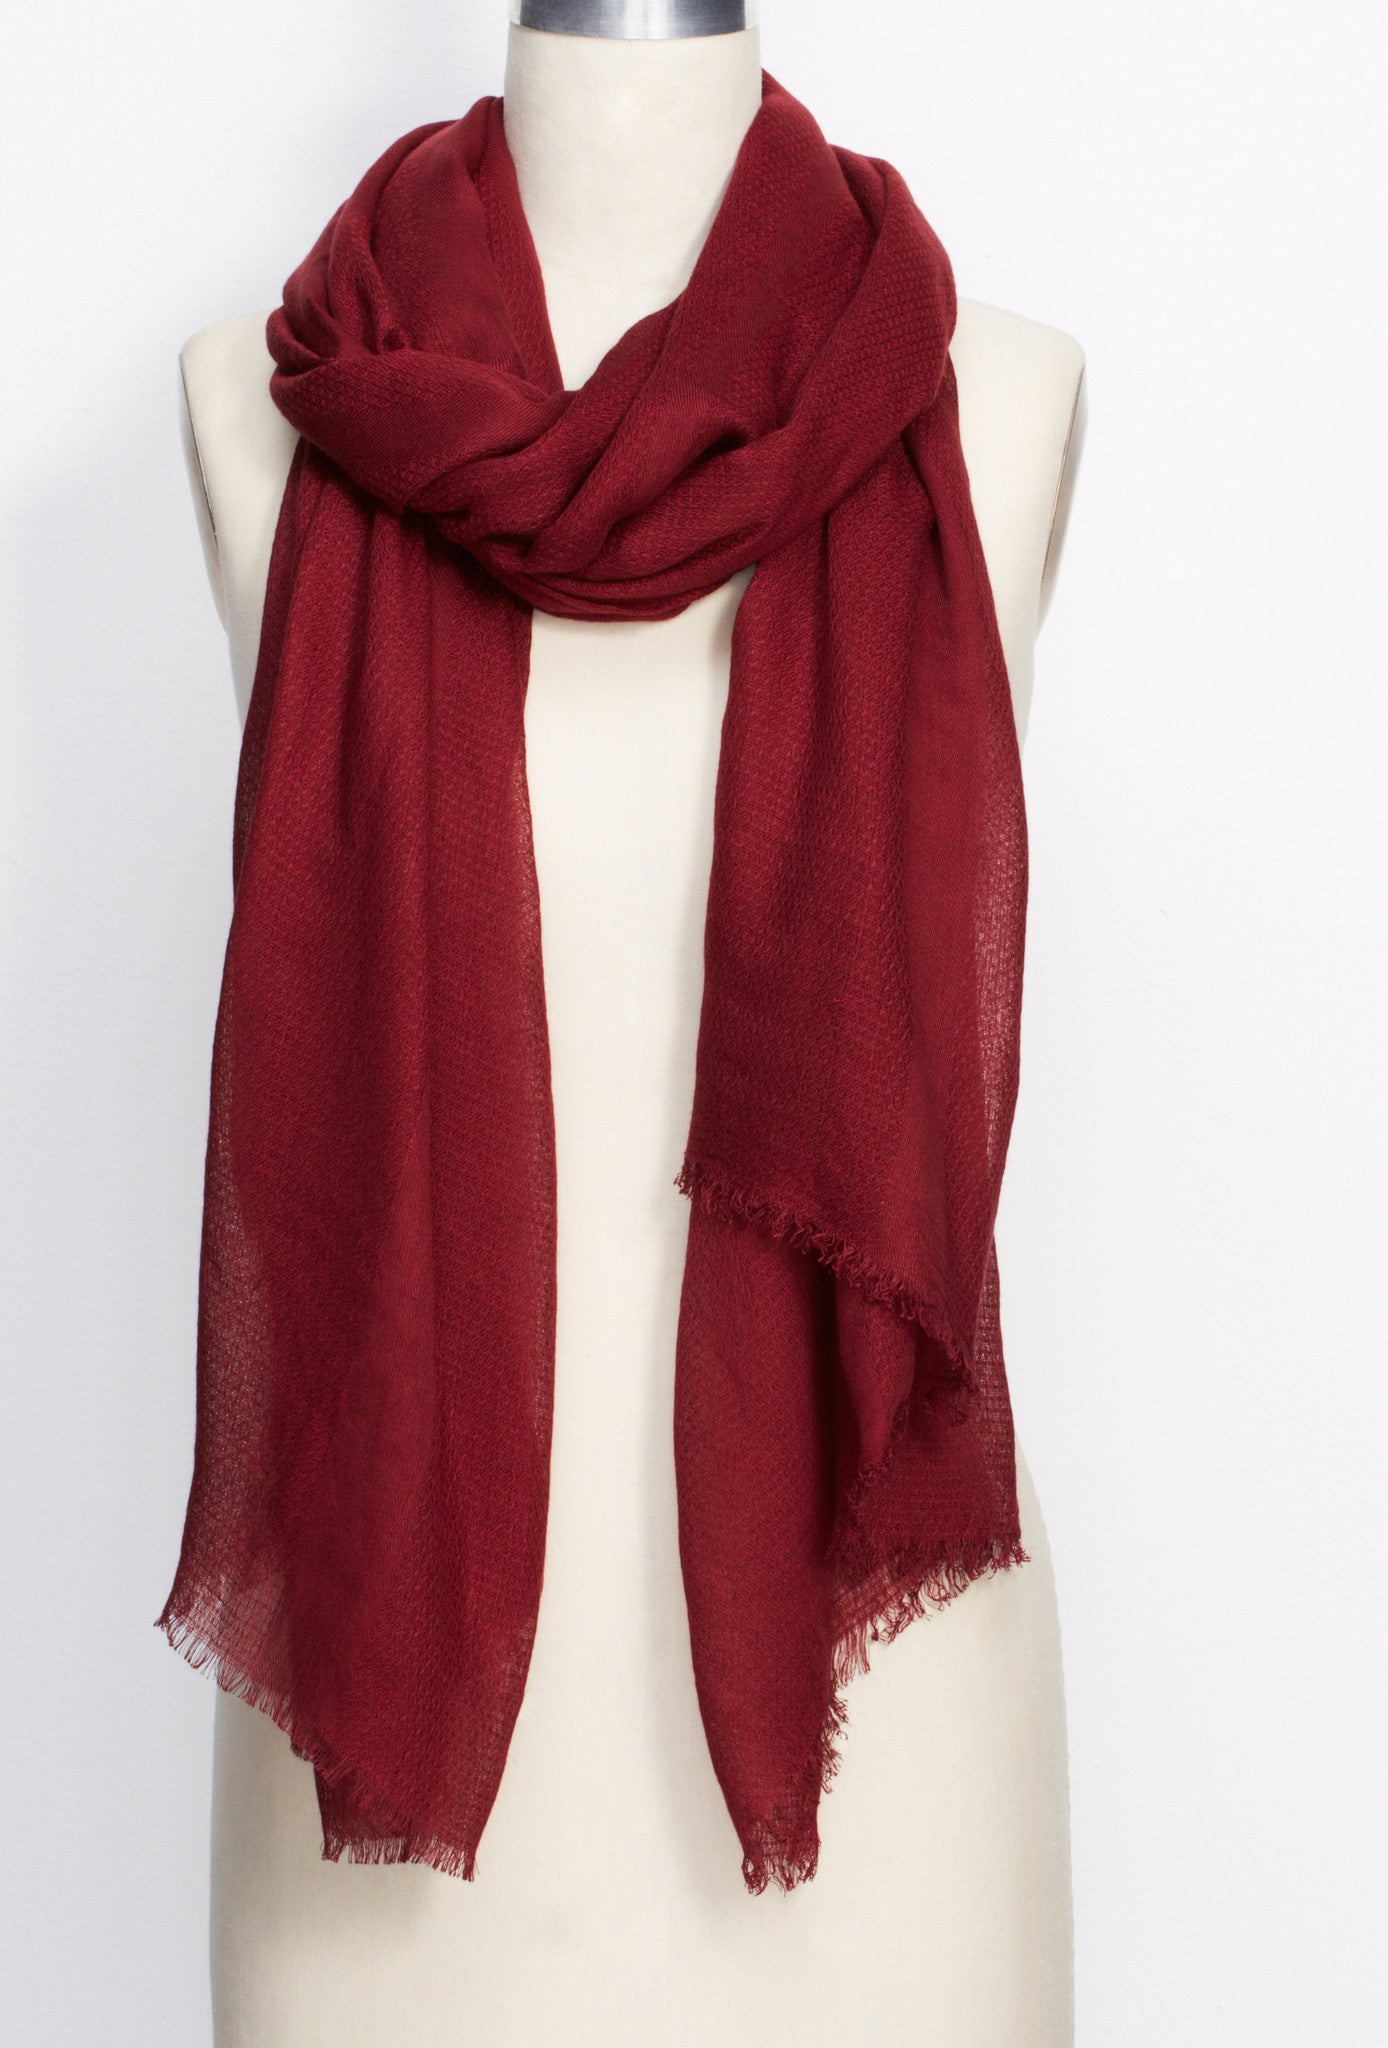 Ann Taylor Mixed Weave Scarf-Chianti Larger Picture